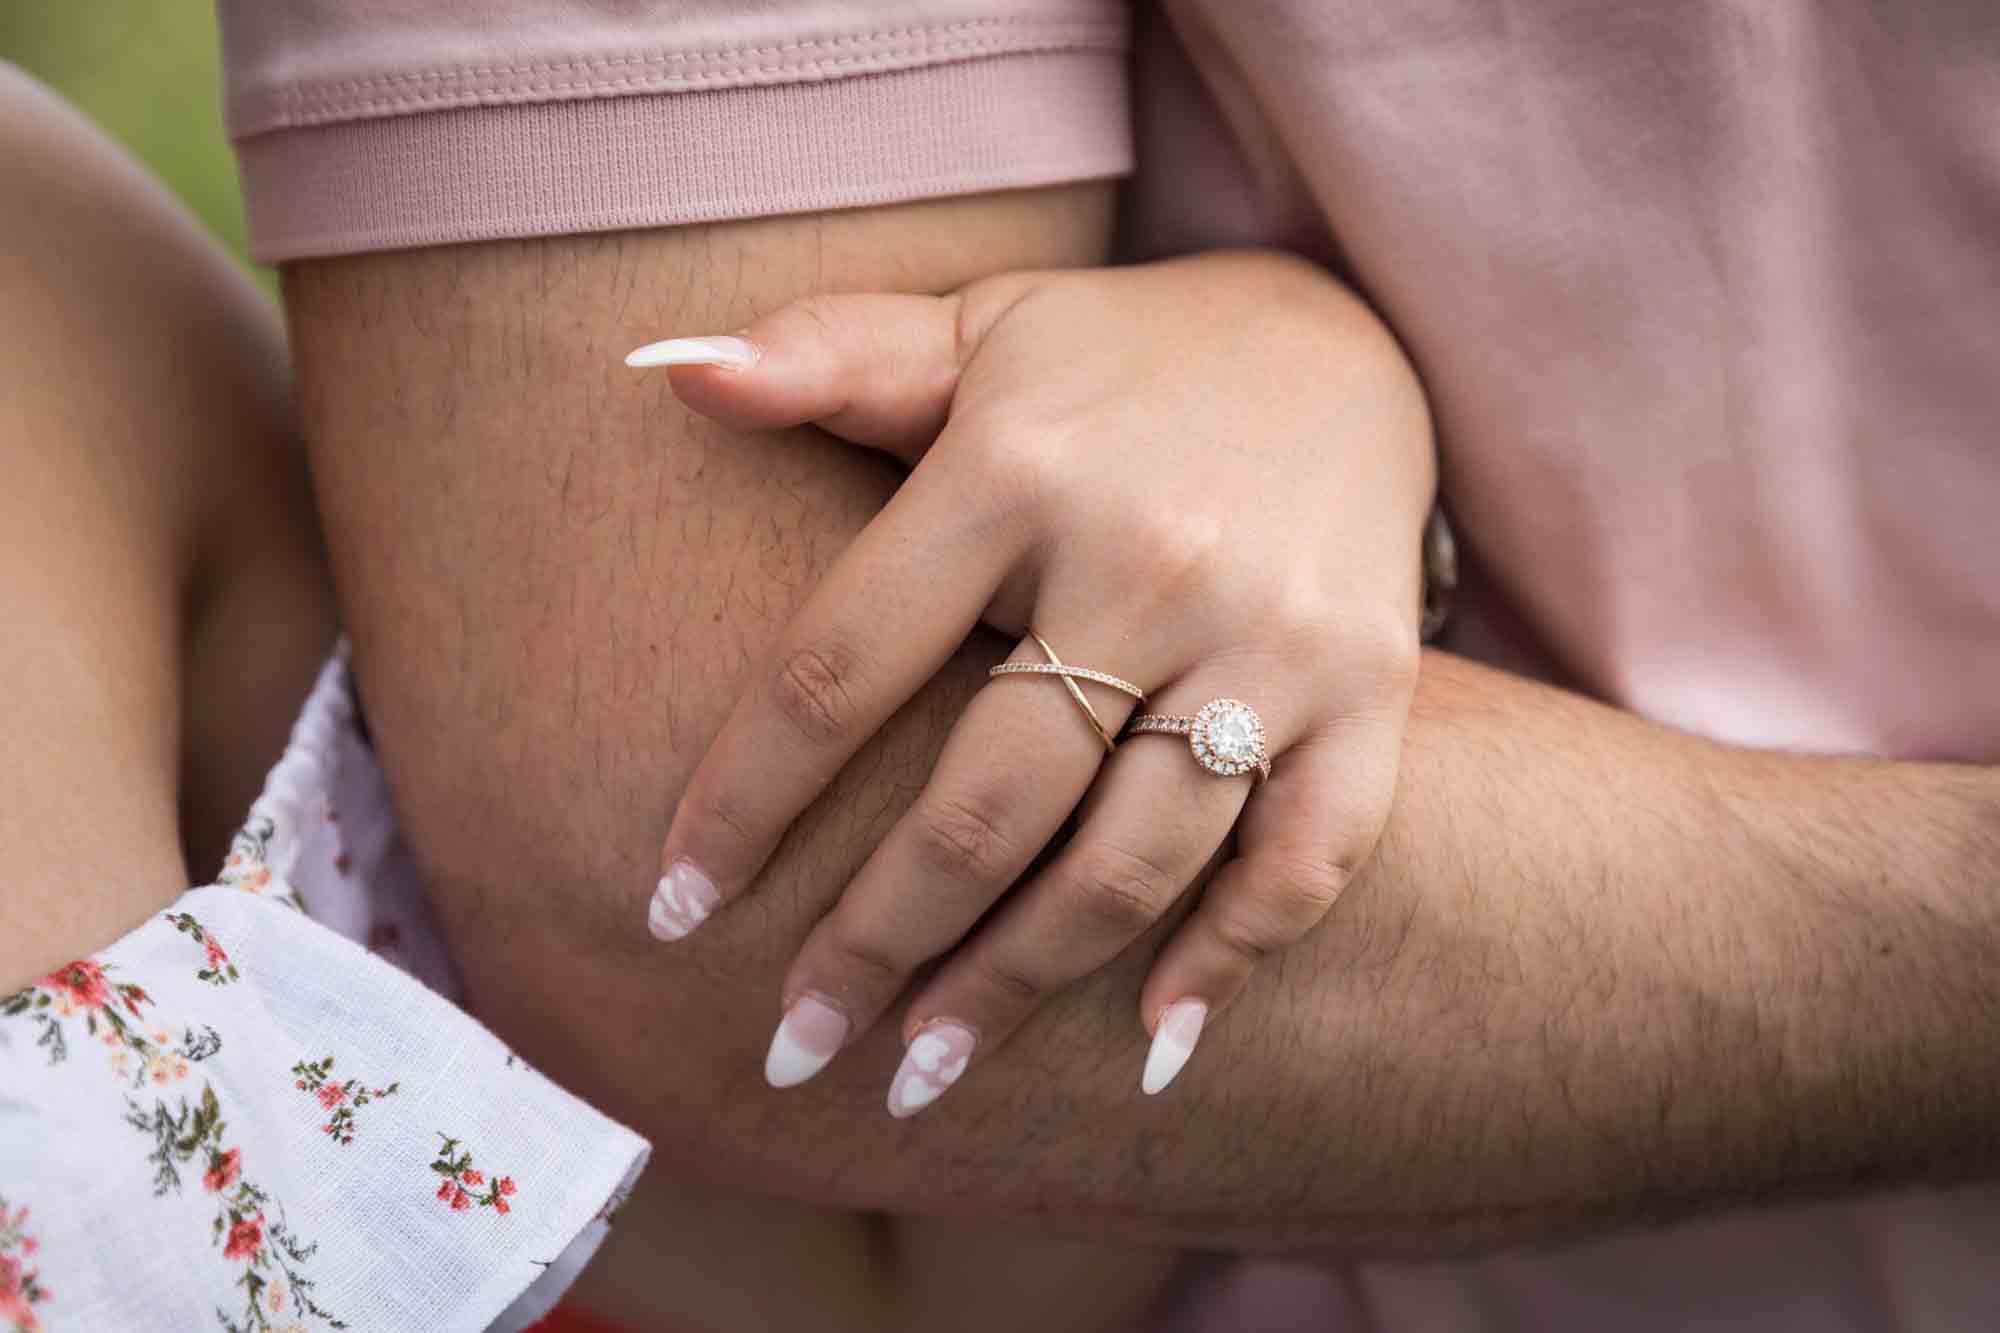 Woman's hand on man's arm showing rose gold engagement ring